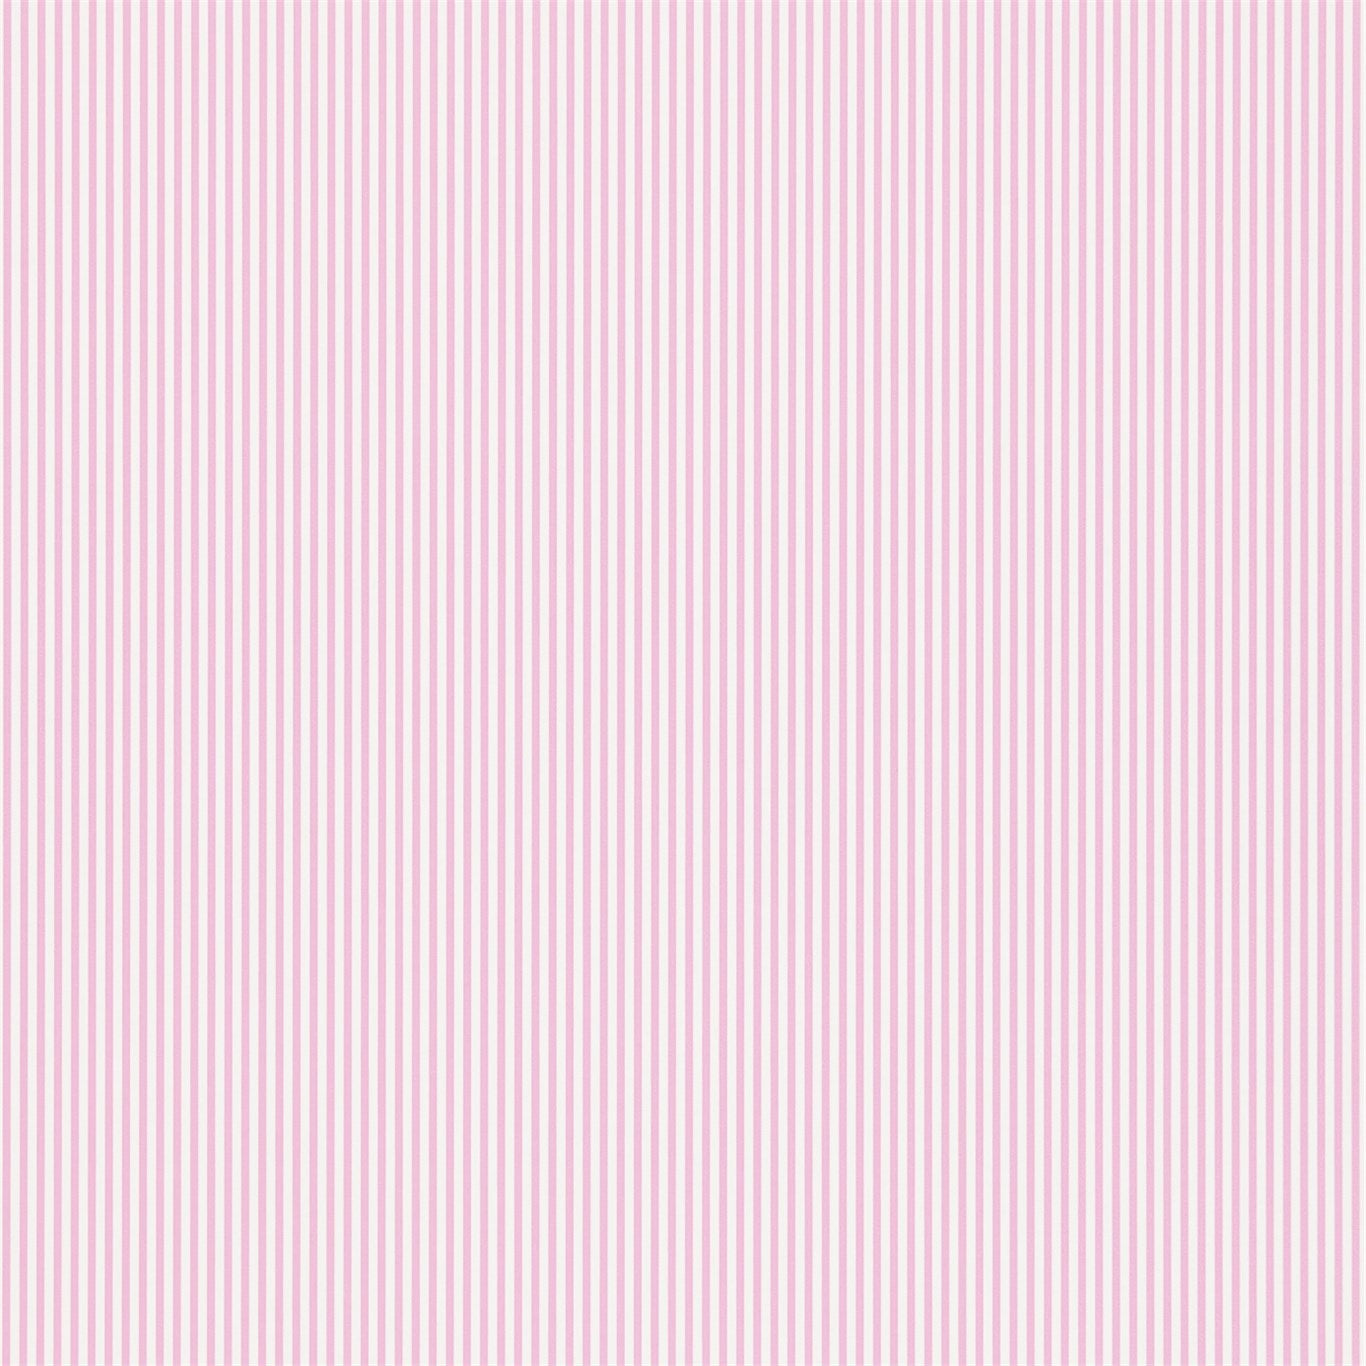 Tickety Boo Wallpaper by Harlequin